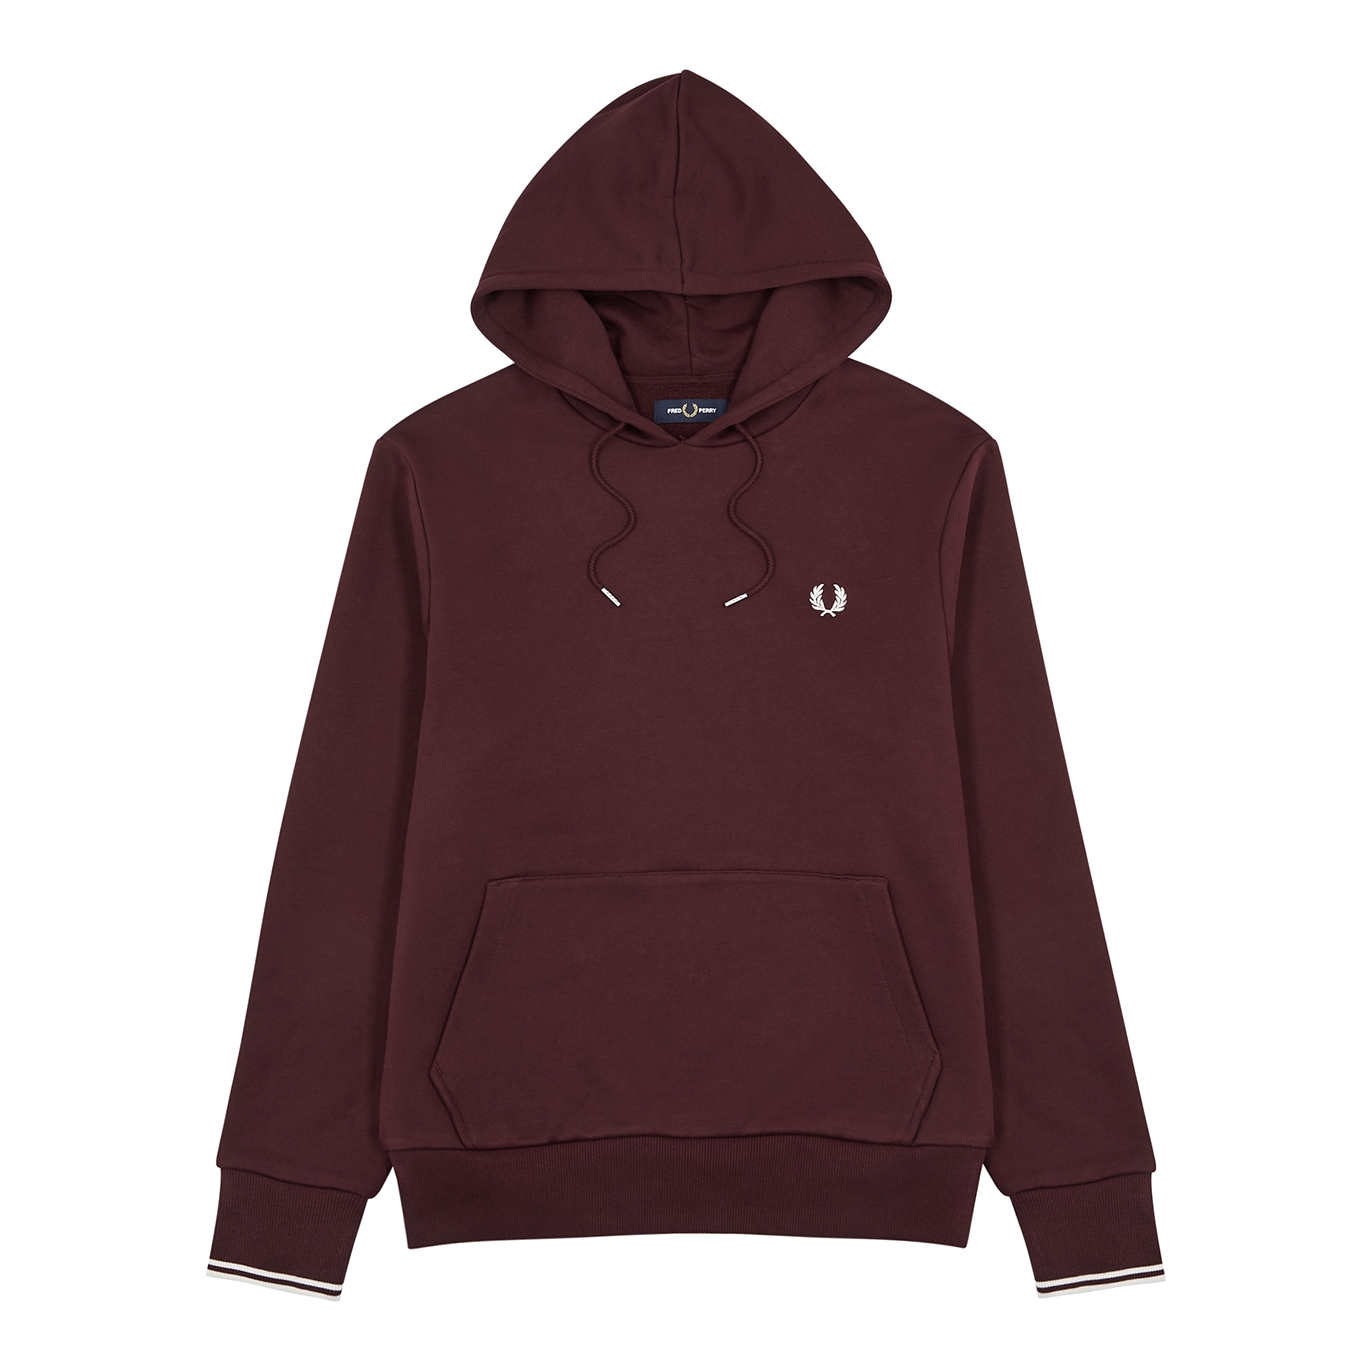 Fred Perry Hooded Cotton-blend Sweatshirt - Burgundy - S